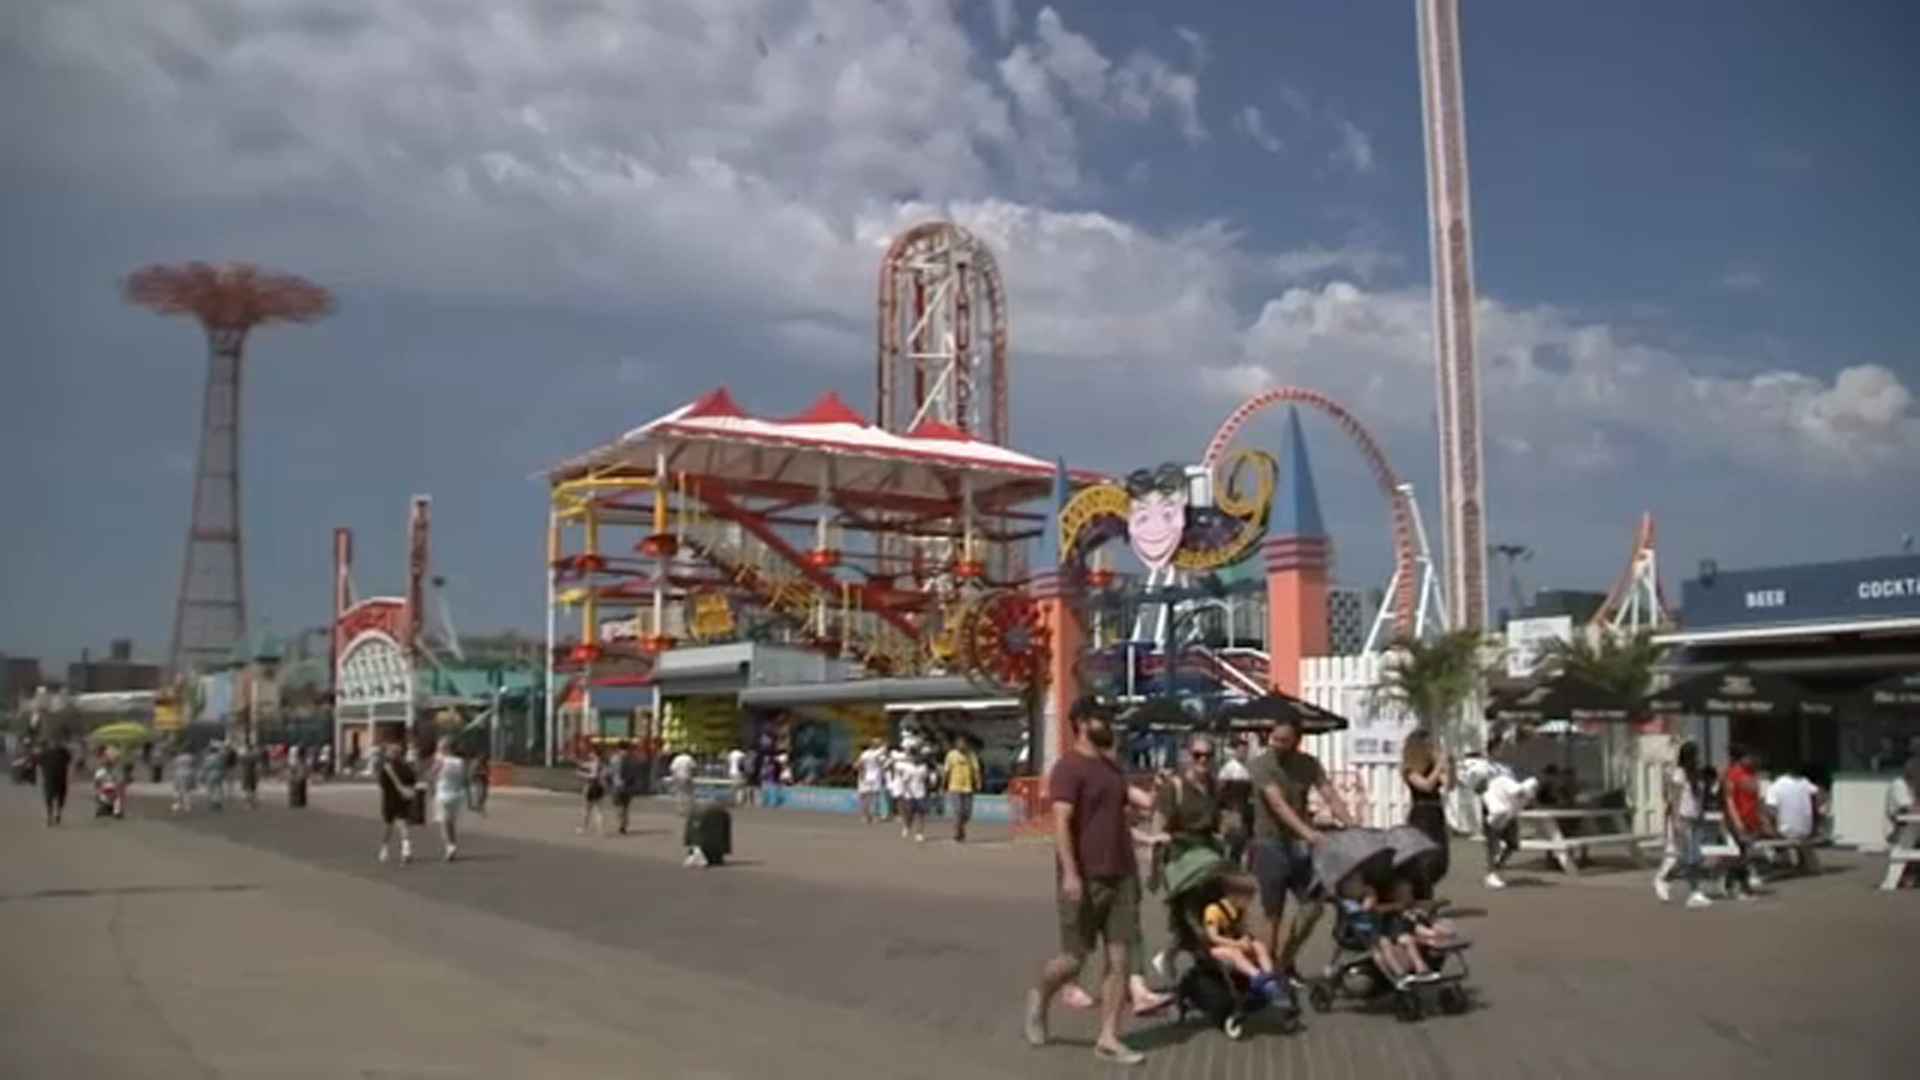 Labor Day: Visitors and residents hit Coney Island to mark the unofficial end of summer